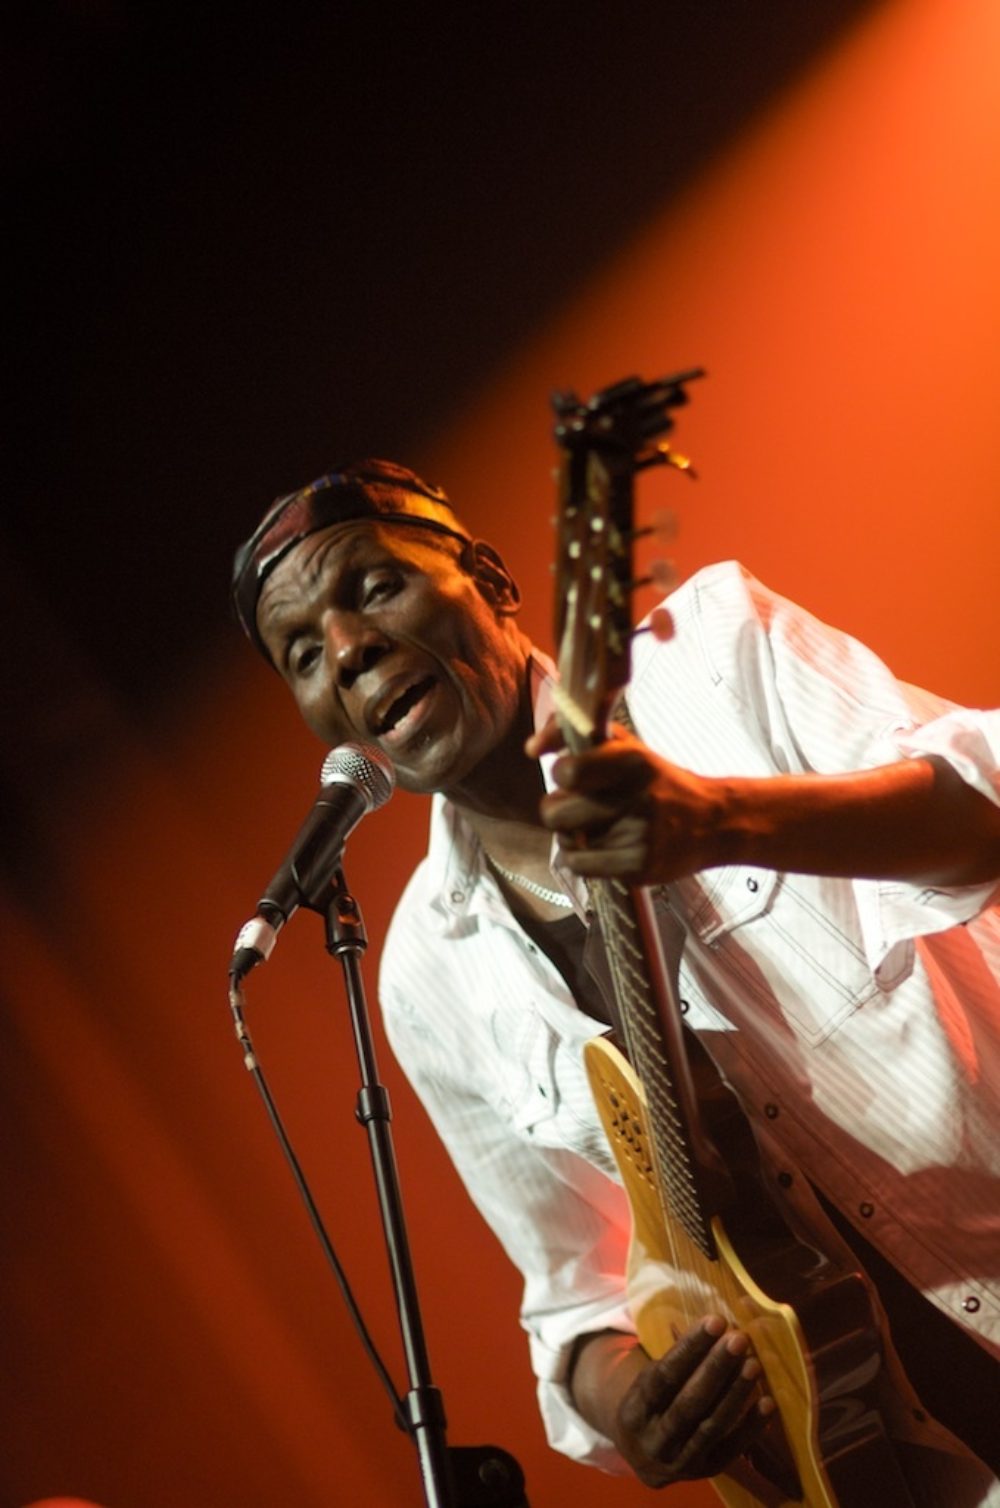 Farewell, Tuku. You will always be remembered and loved!